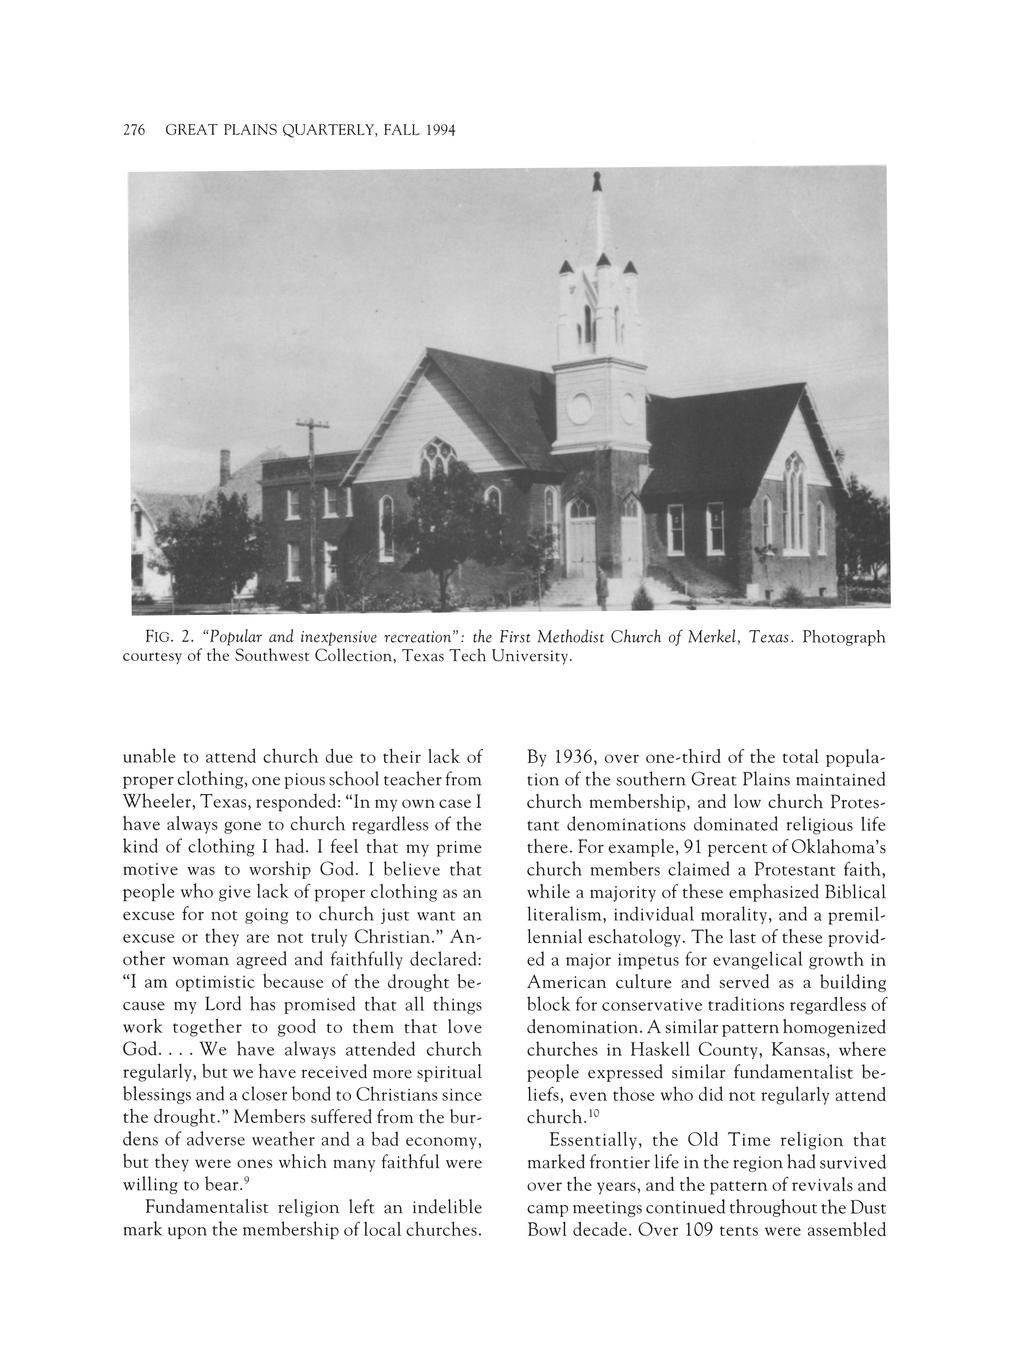 276 GREAT PLAINS QUARTERLY, FALL 1994 FIG. 2. "Popular and inexpensive recreation": the First Methodist Church of Merkel, Texas. Photograph courtesy of the Southwest Collection, Texas Tech University.